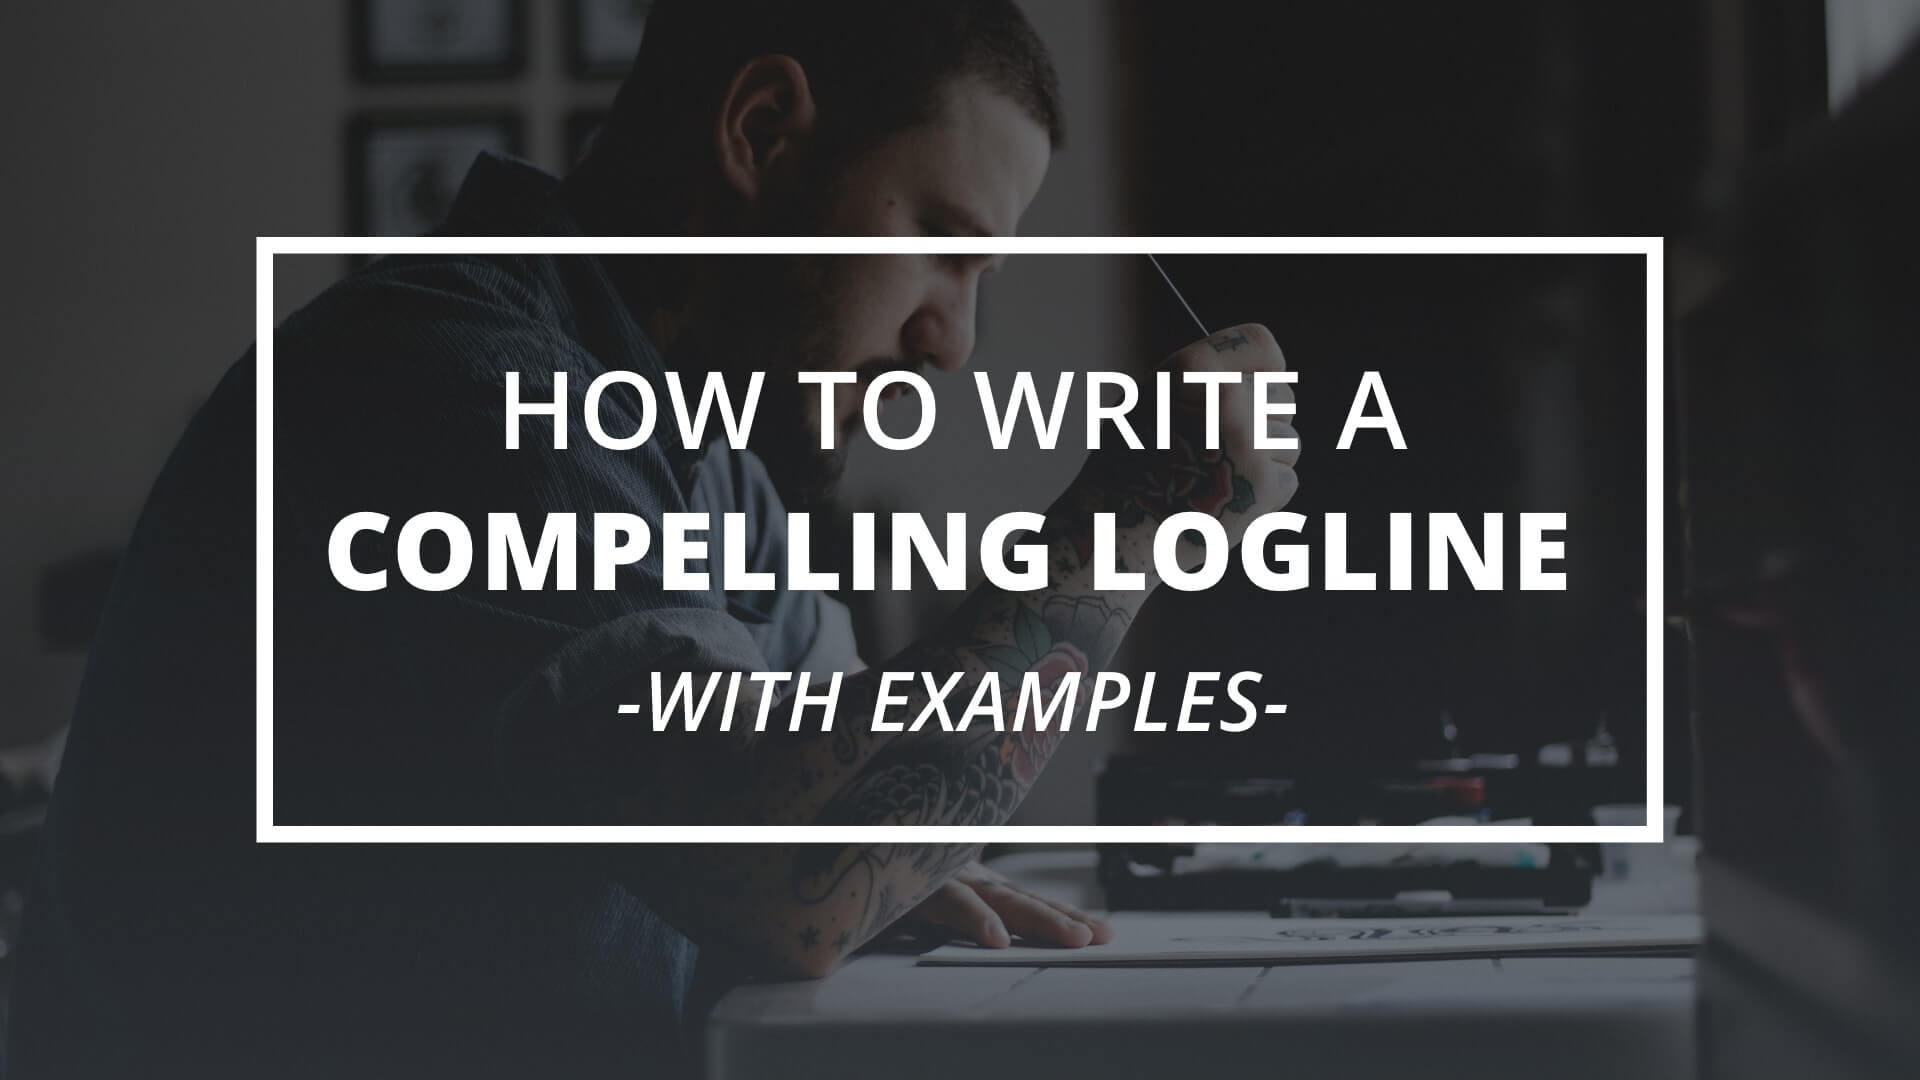 How to Write a Compelling Logline (with a Logline Examples) - Featured - StudioBinder